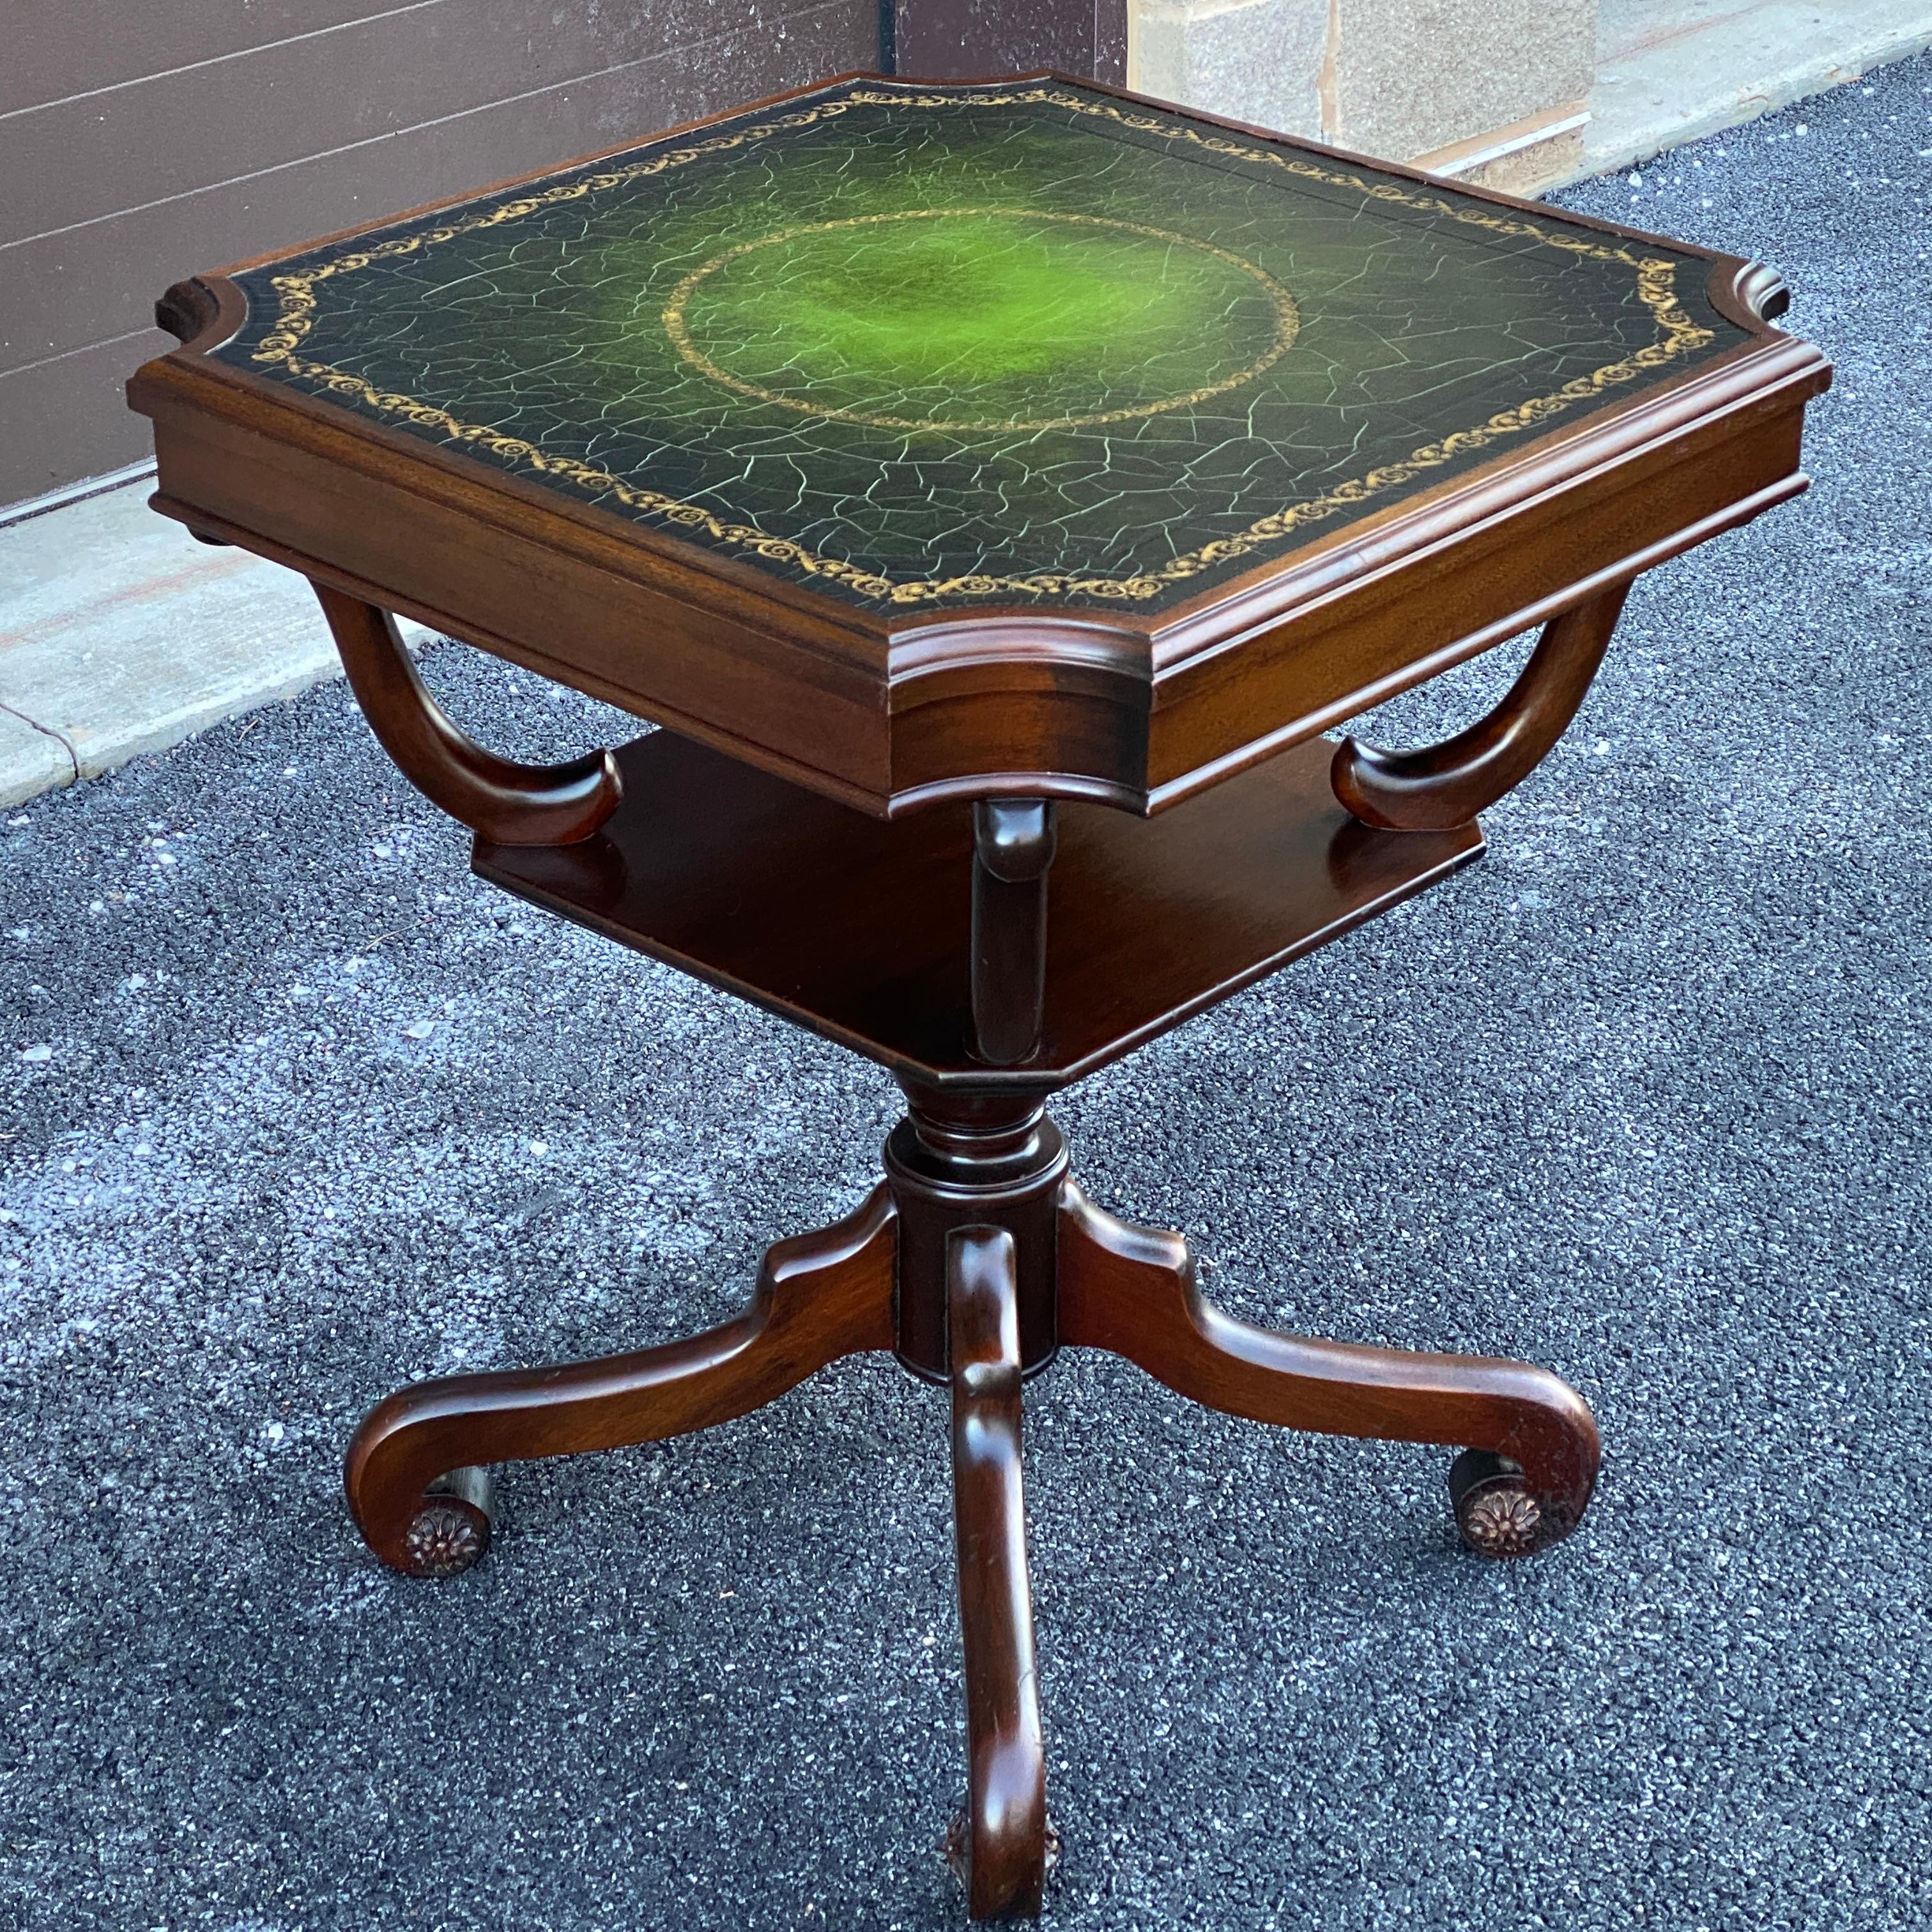 Regency Mahogany Scroll Foot Center Table With Tooled Green Leather Top For Sale 1